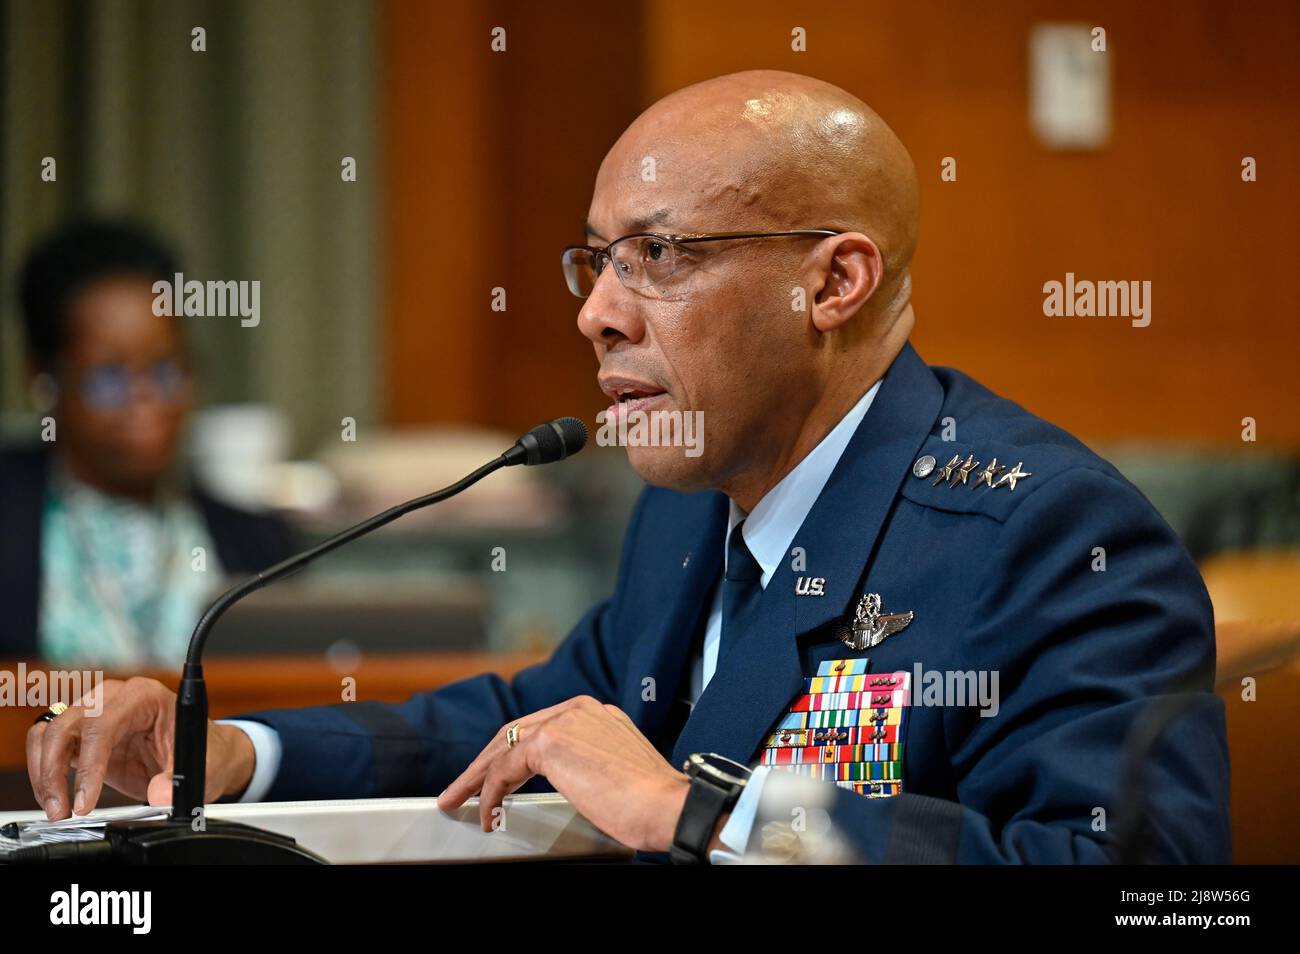 Washington, United States. 17th May, 2022. U.S. Air Force Chief of Staff Gen. CQ Brown, Jr. responds to a question while testifying before the Senate Appropriations Subcommittee on Defense on the fiscal year 2023 budget for the Air Force on Capitol Hill, May 17, 2022 in Washington, DC Credit: Eric Dietrich/U.S. Air Force/Alamy Live News Stock Photo